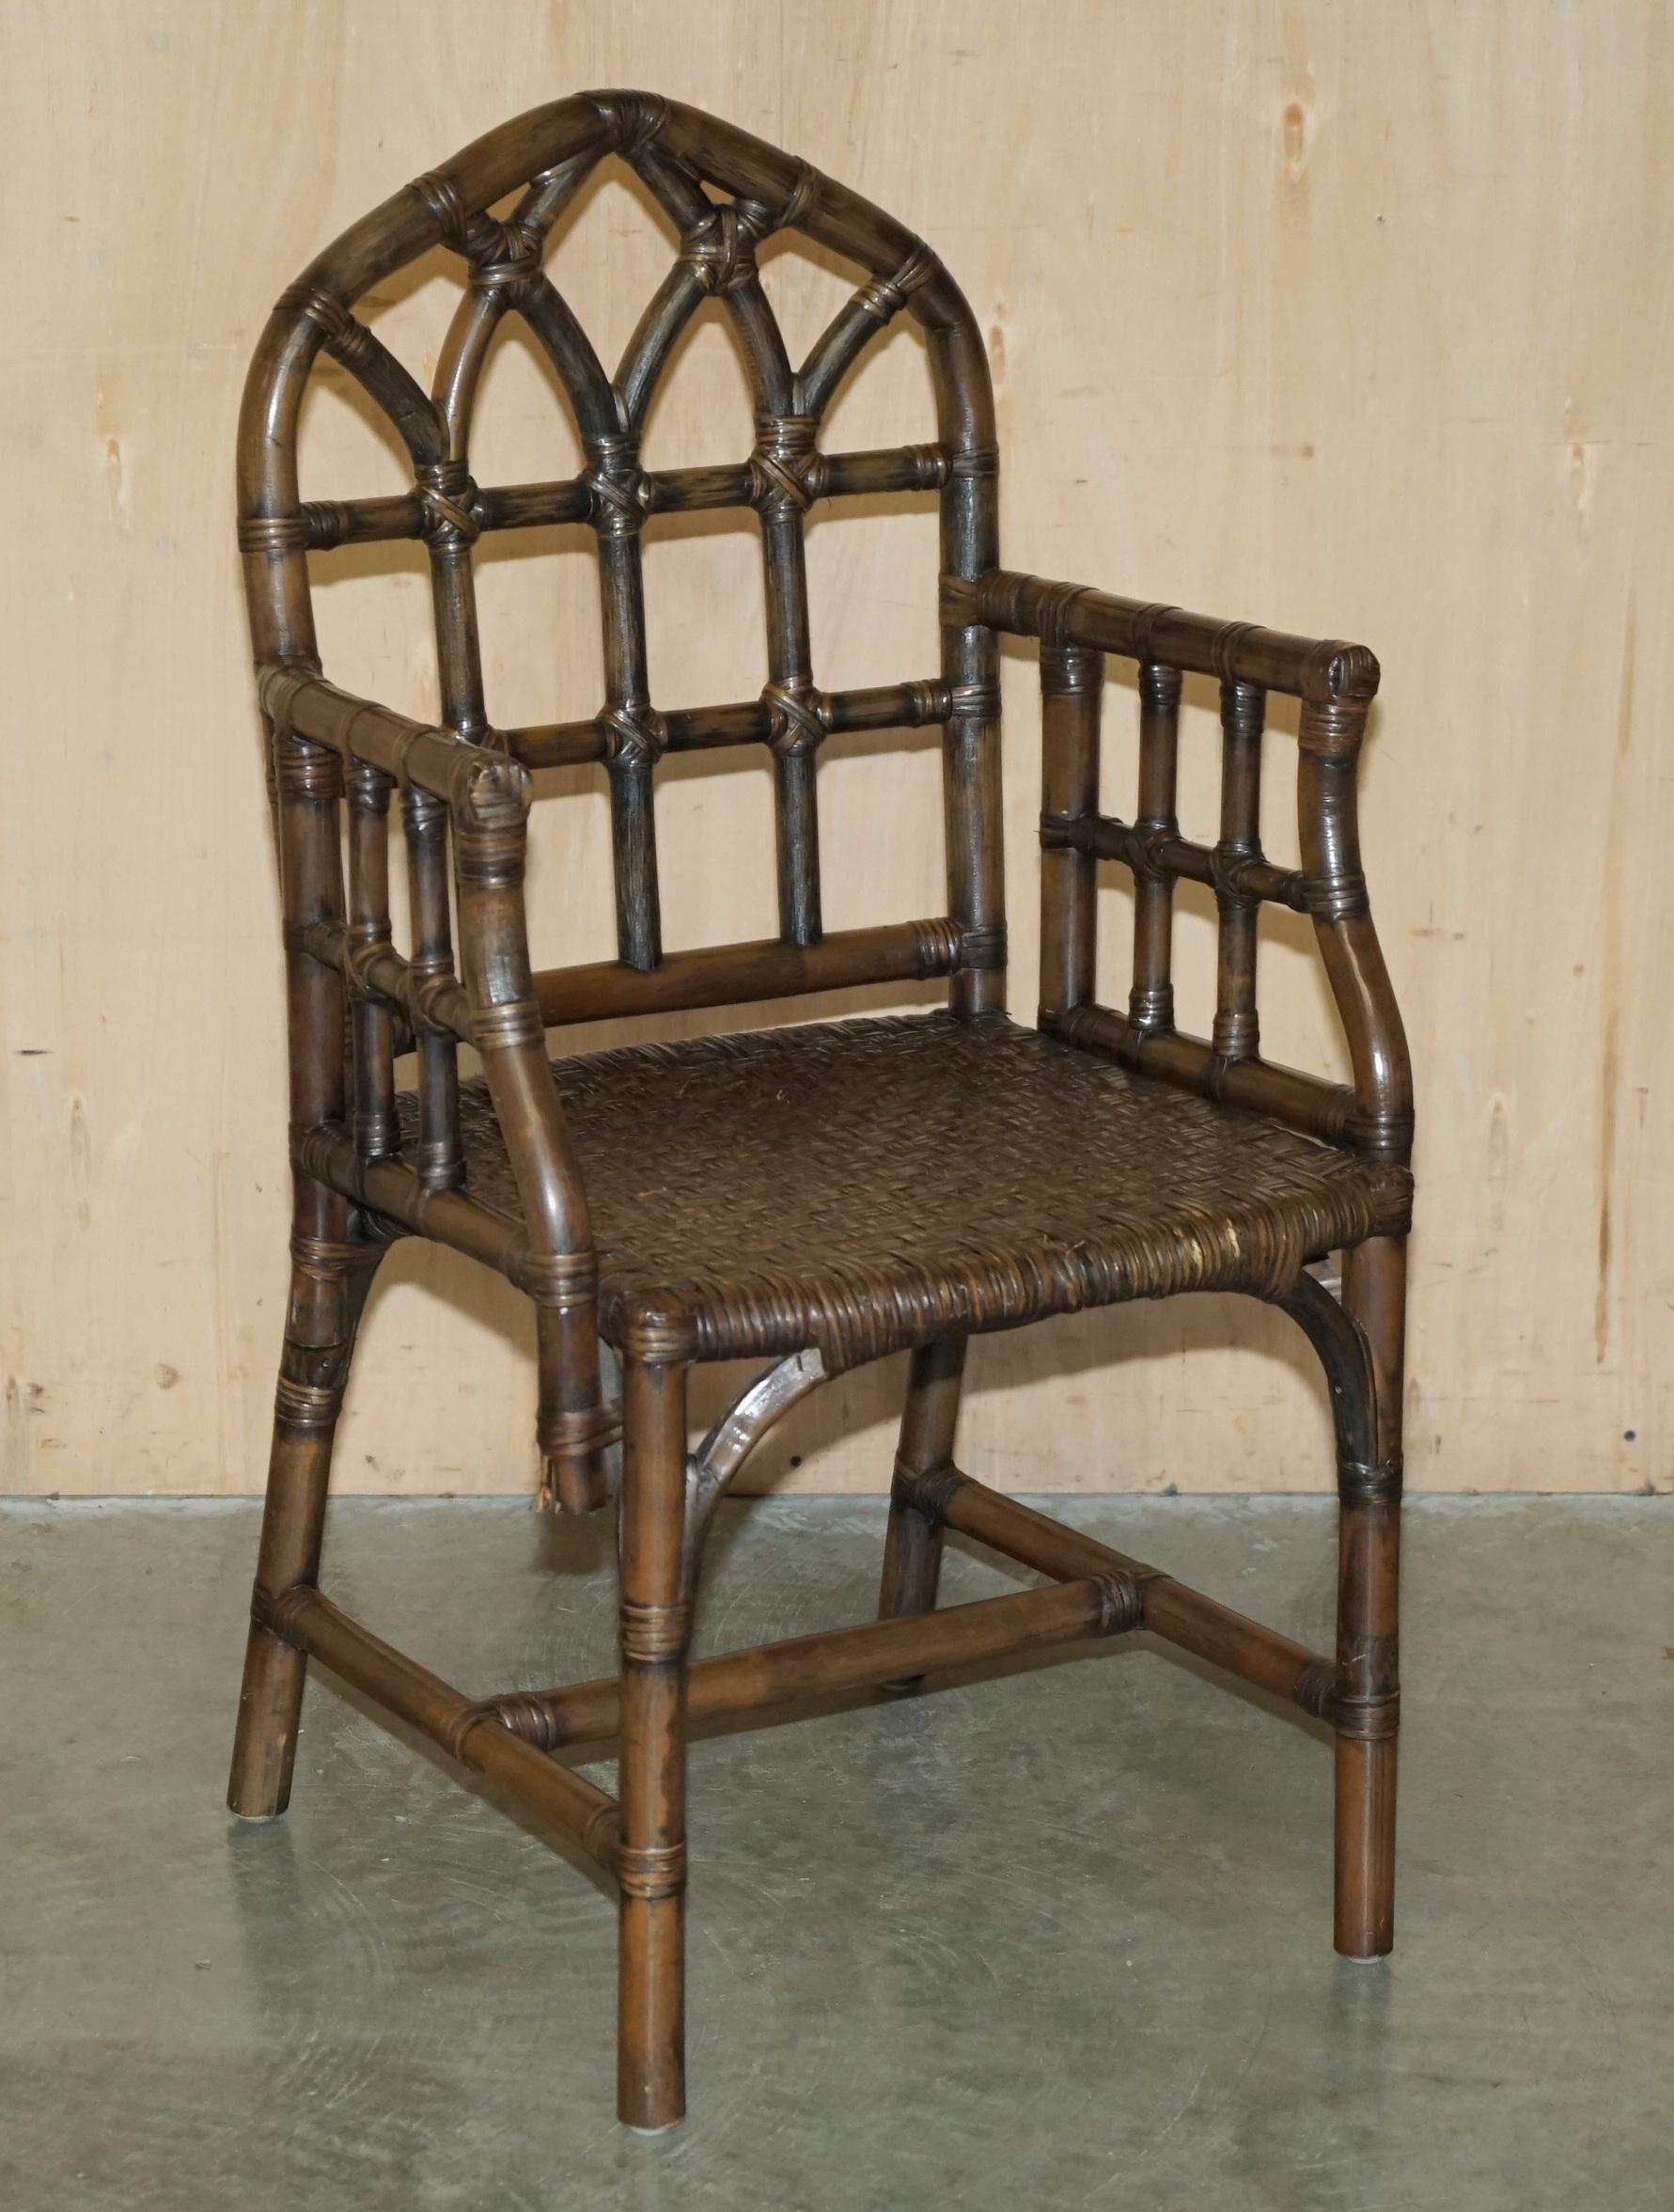 Royal House Antiques

Royal House Antiques is delighted to offer for sale this stunning pair of Mid Century McGuire Rattan Gothic Cathedral back armchairs 

Please note the delivery fee listed is just a guide, it covers within the M25 only for the